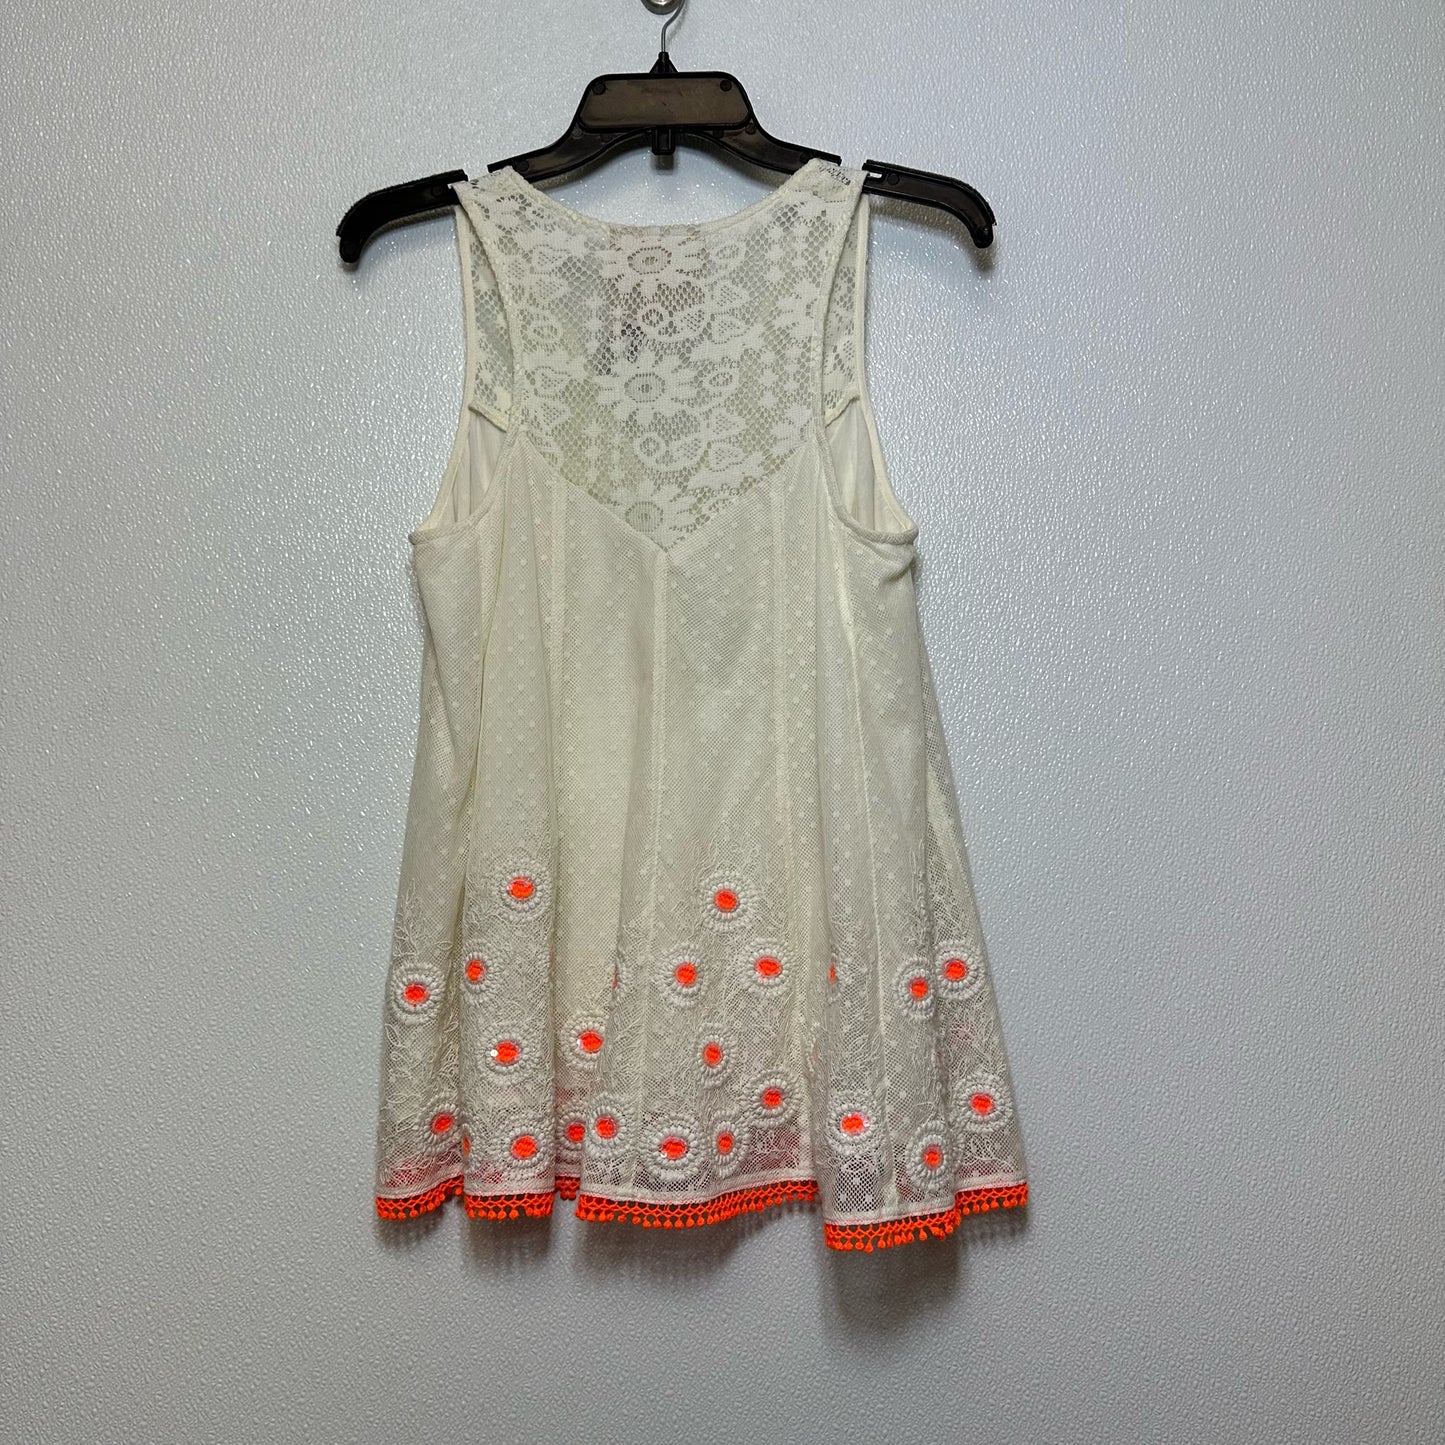 Top Sleeveless By Clothes Mentor  Size: S